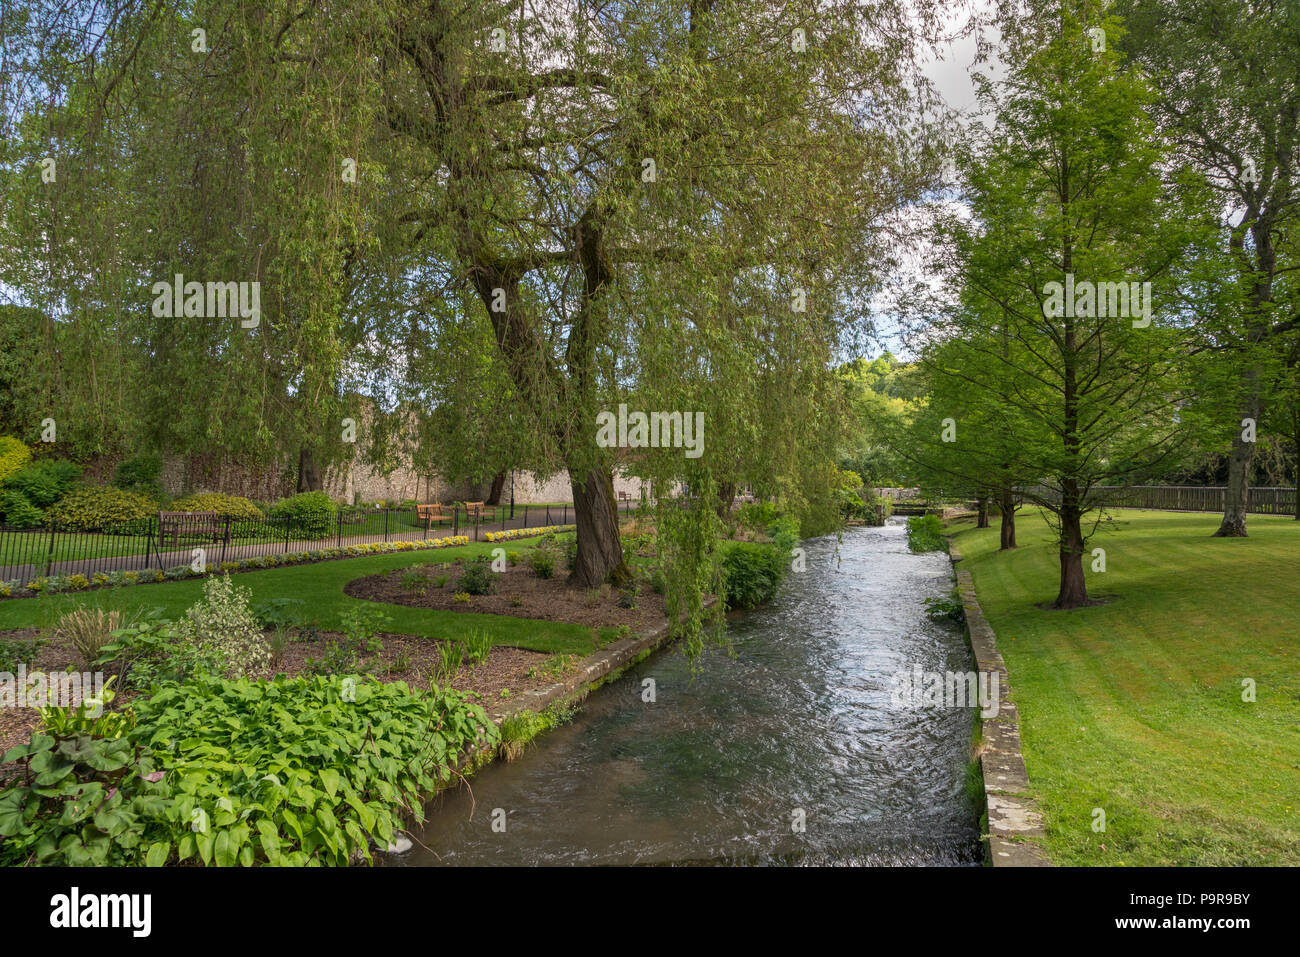 The River Itchen as it flows through Winchester, Hampshire, England in an area known as The Weirs. On the left is part of the old city wall. Stock Photo